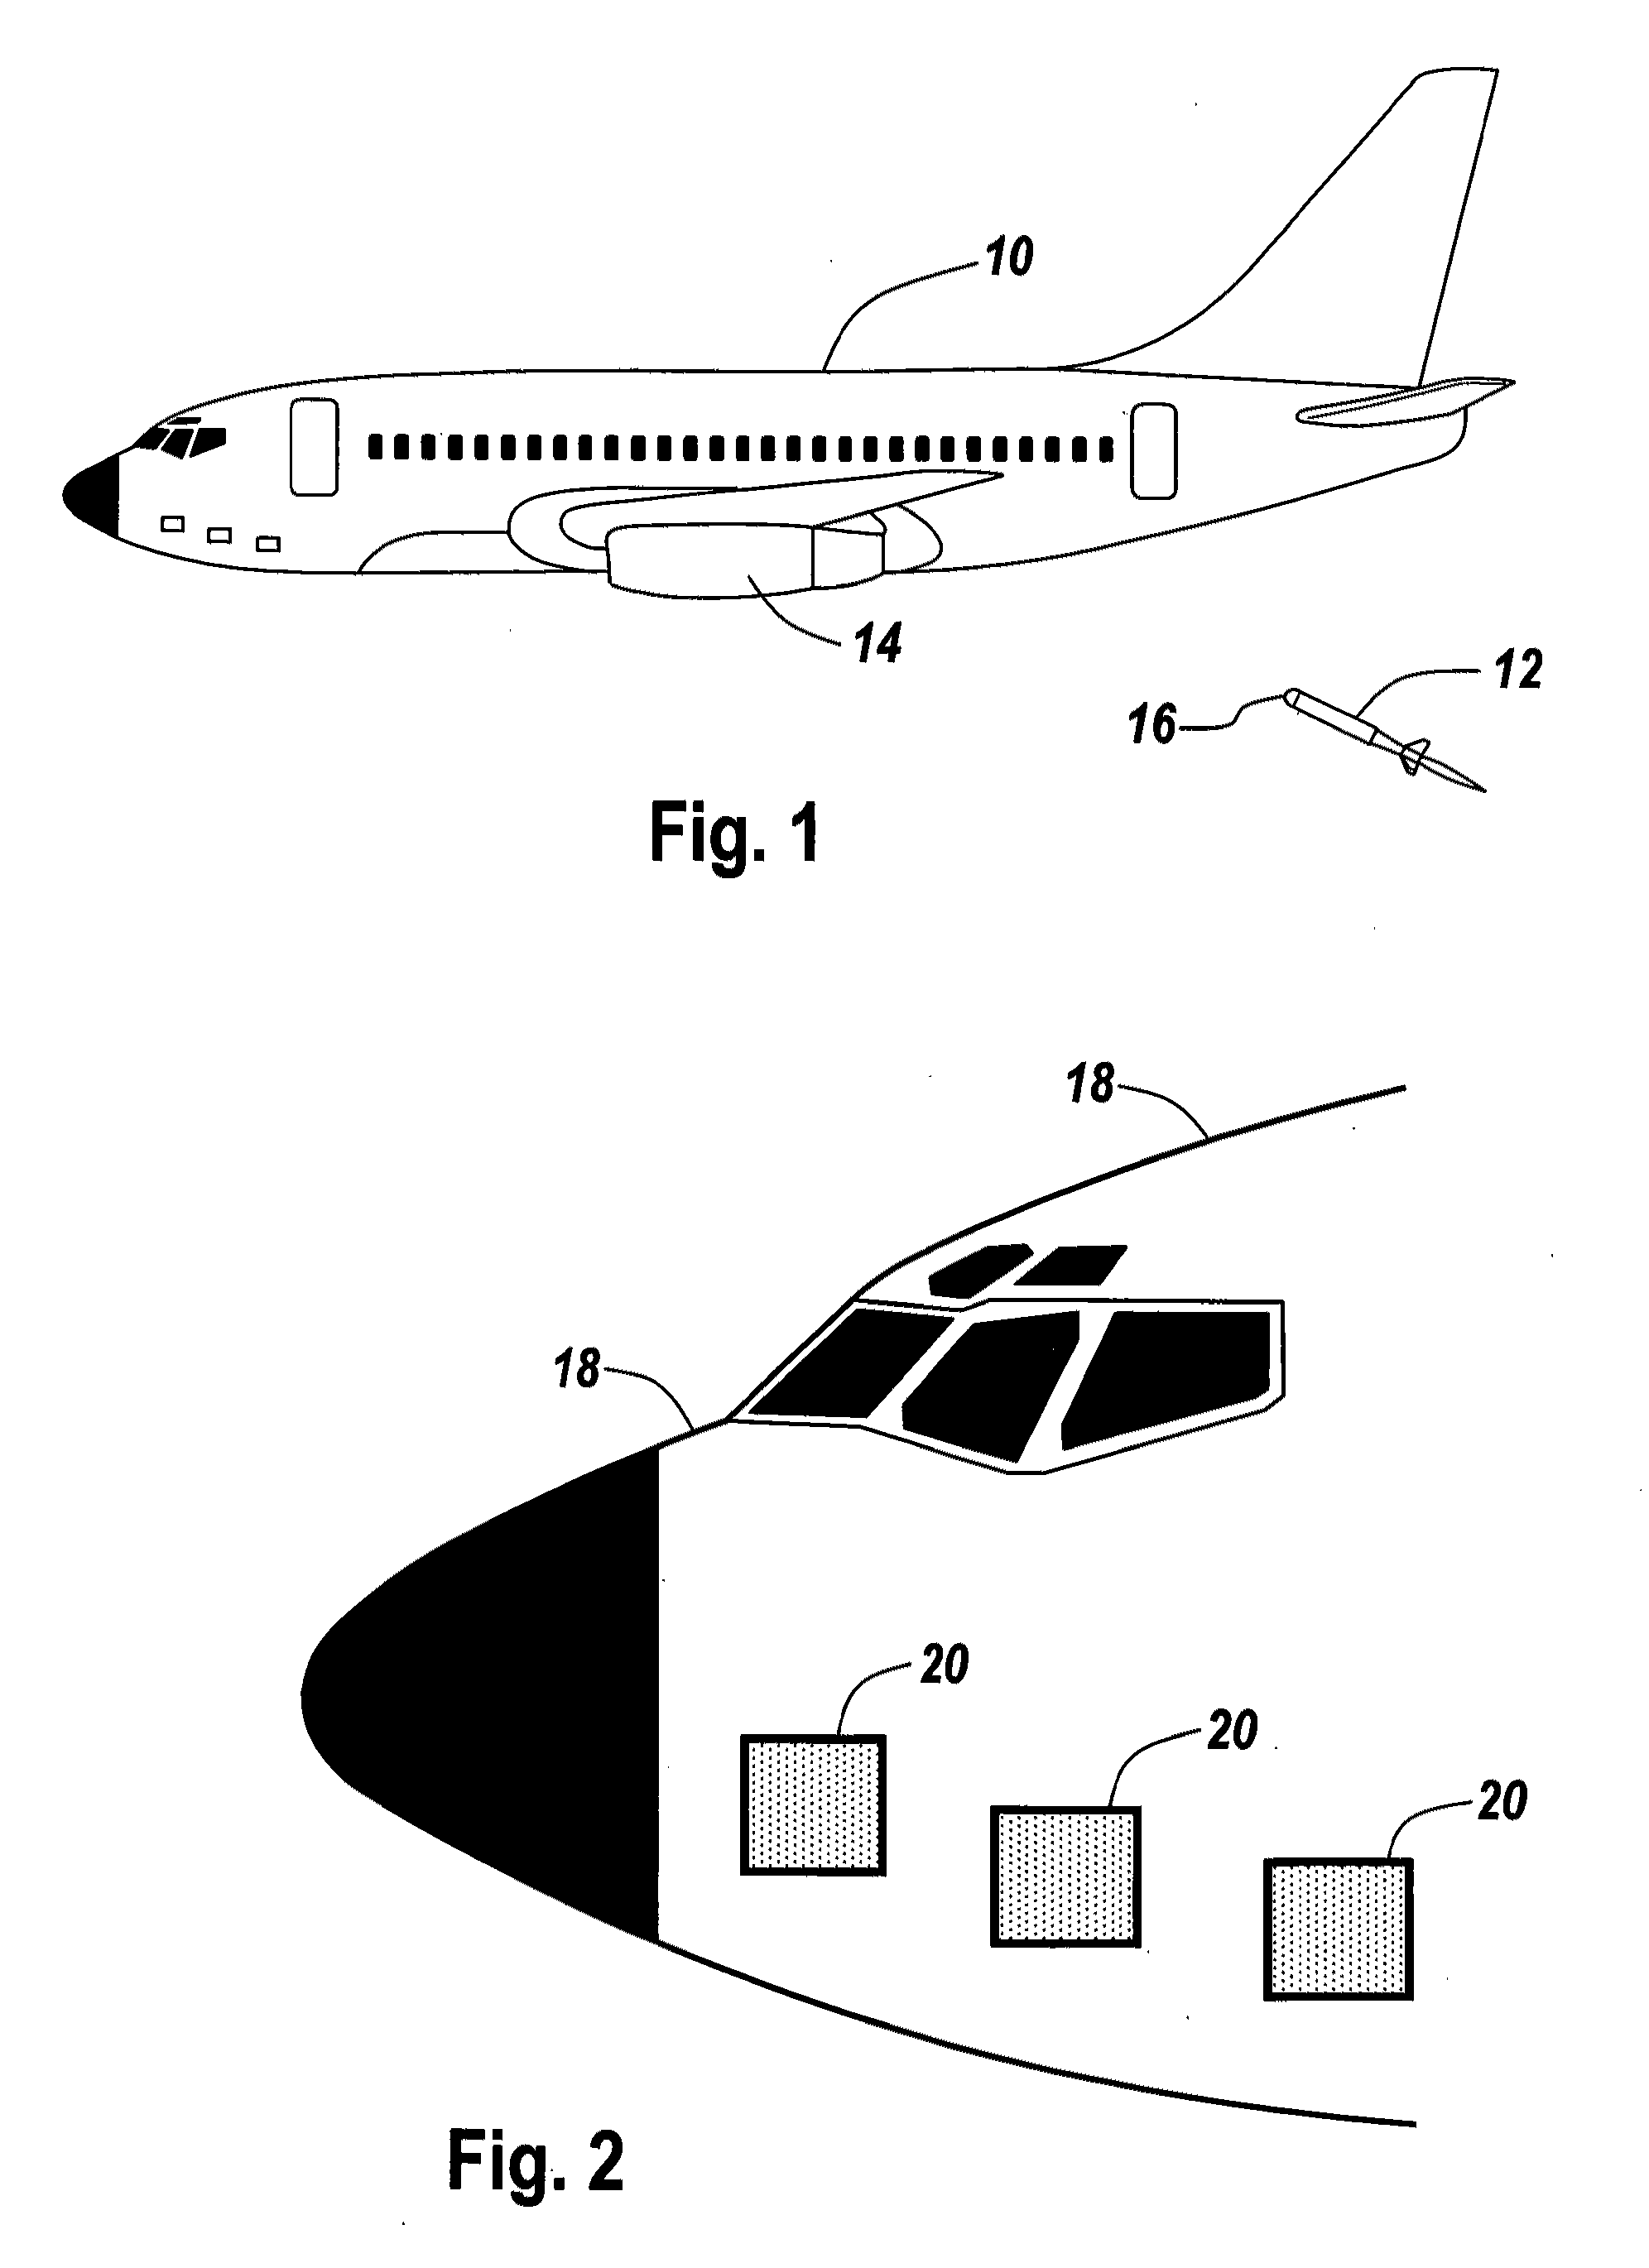 Method and apparatus for countermeasuring an infrared seeking missile utilizing a multispectral emissive film